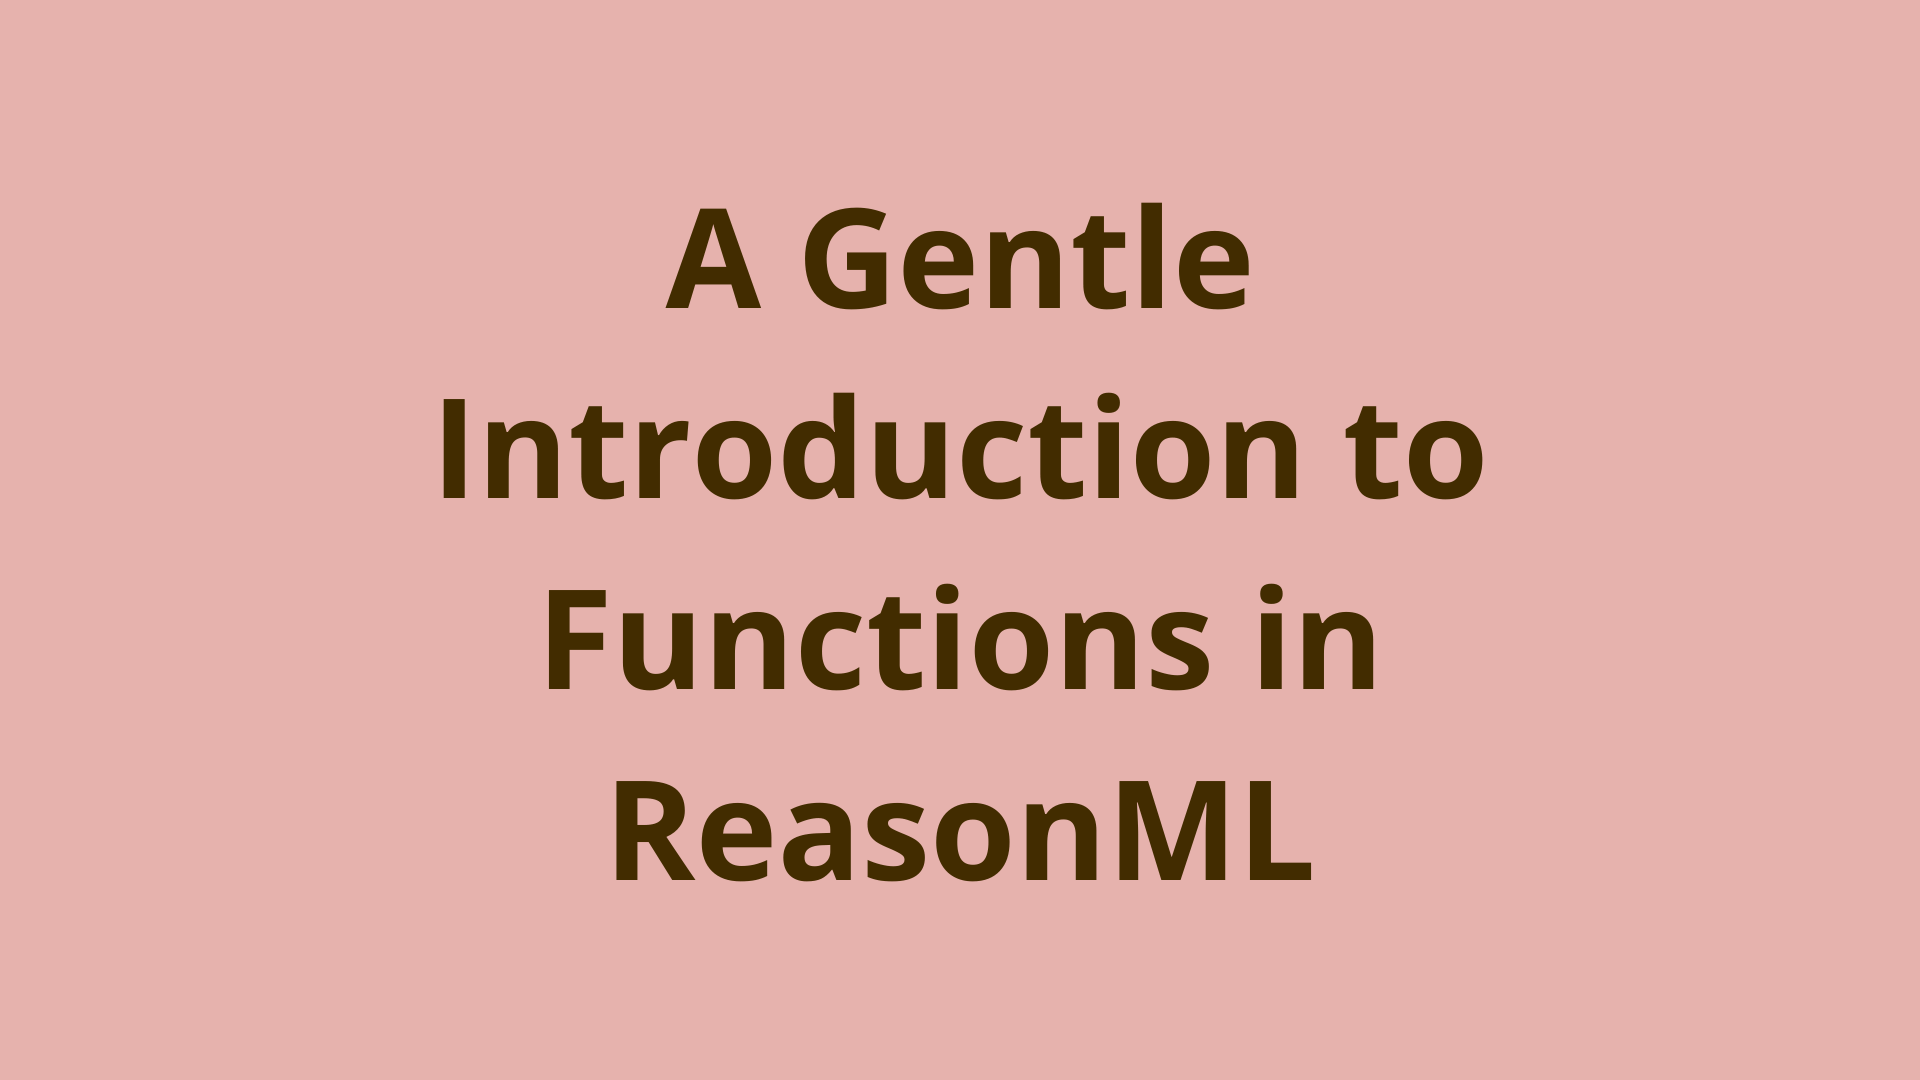 Image of A gentle introduction to functions in ReasonML